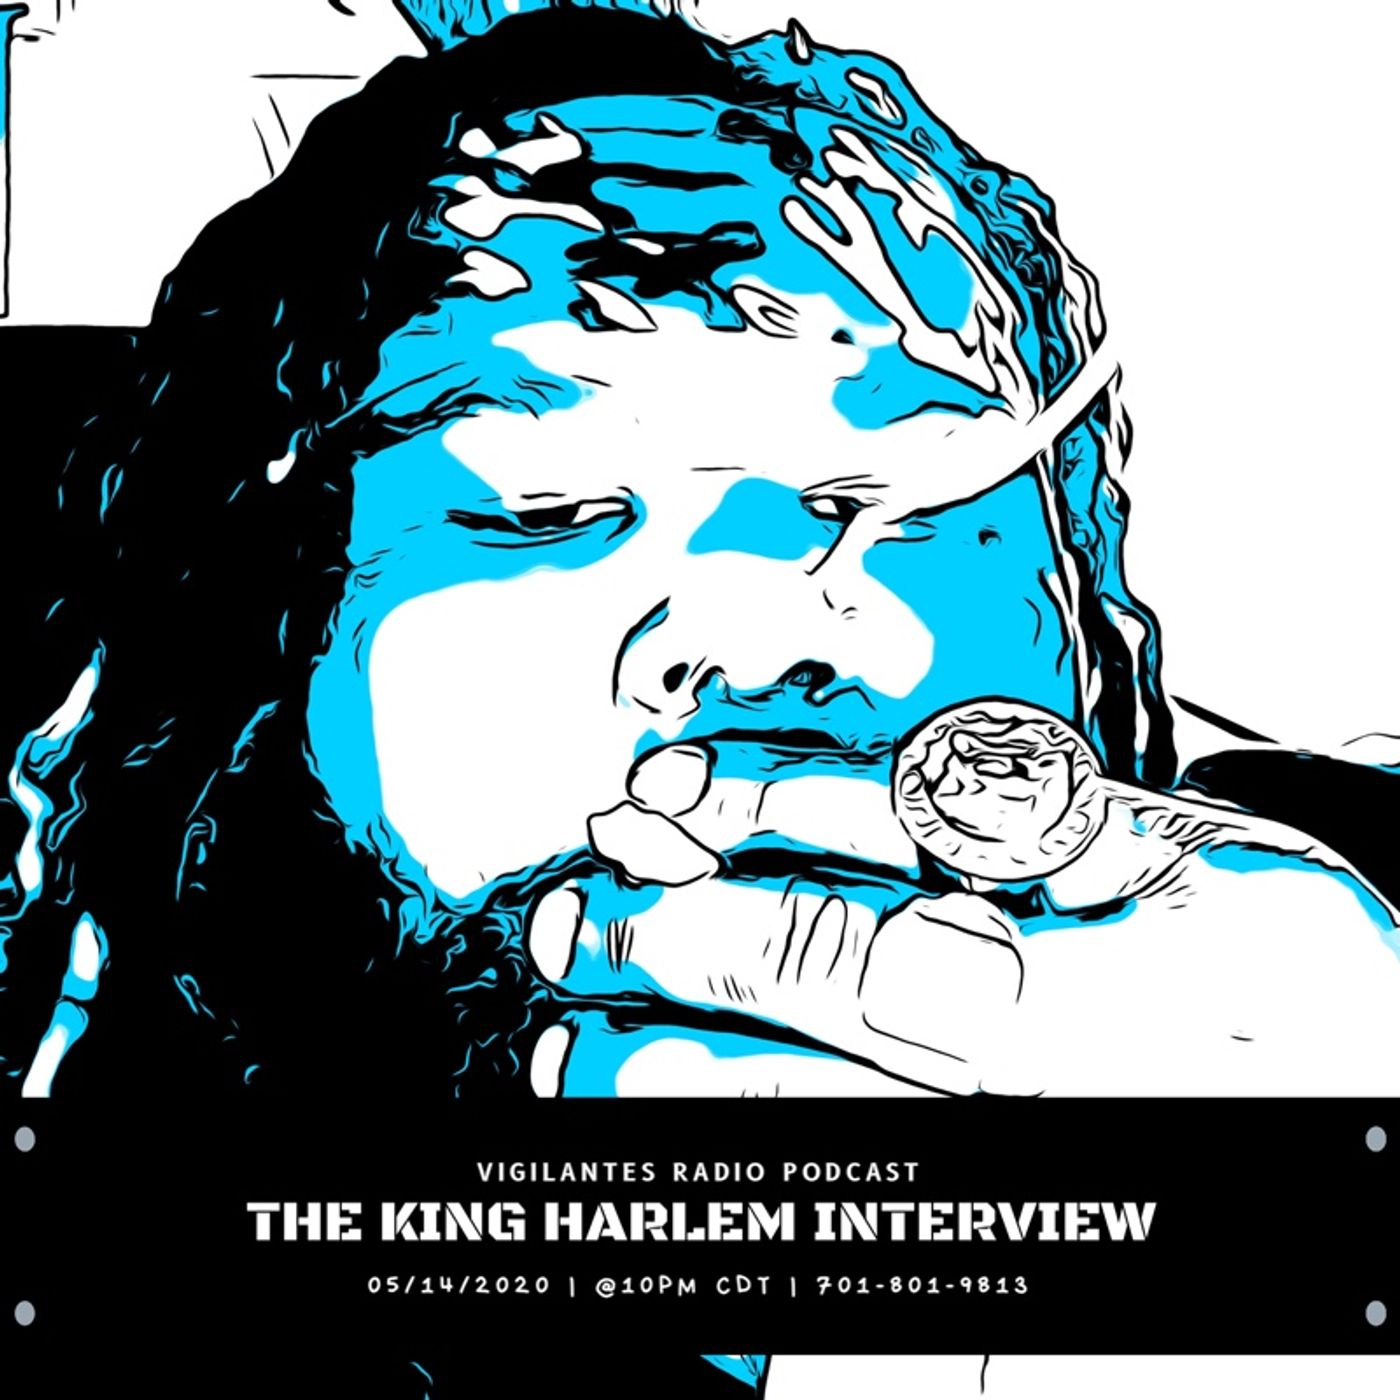 The King Harlem Interview. Image